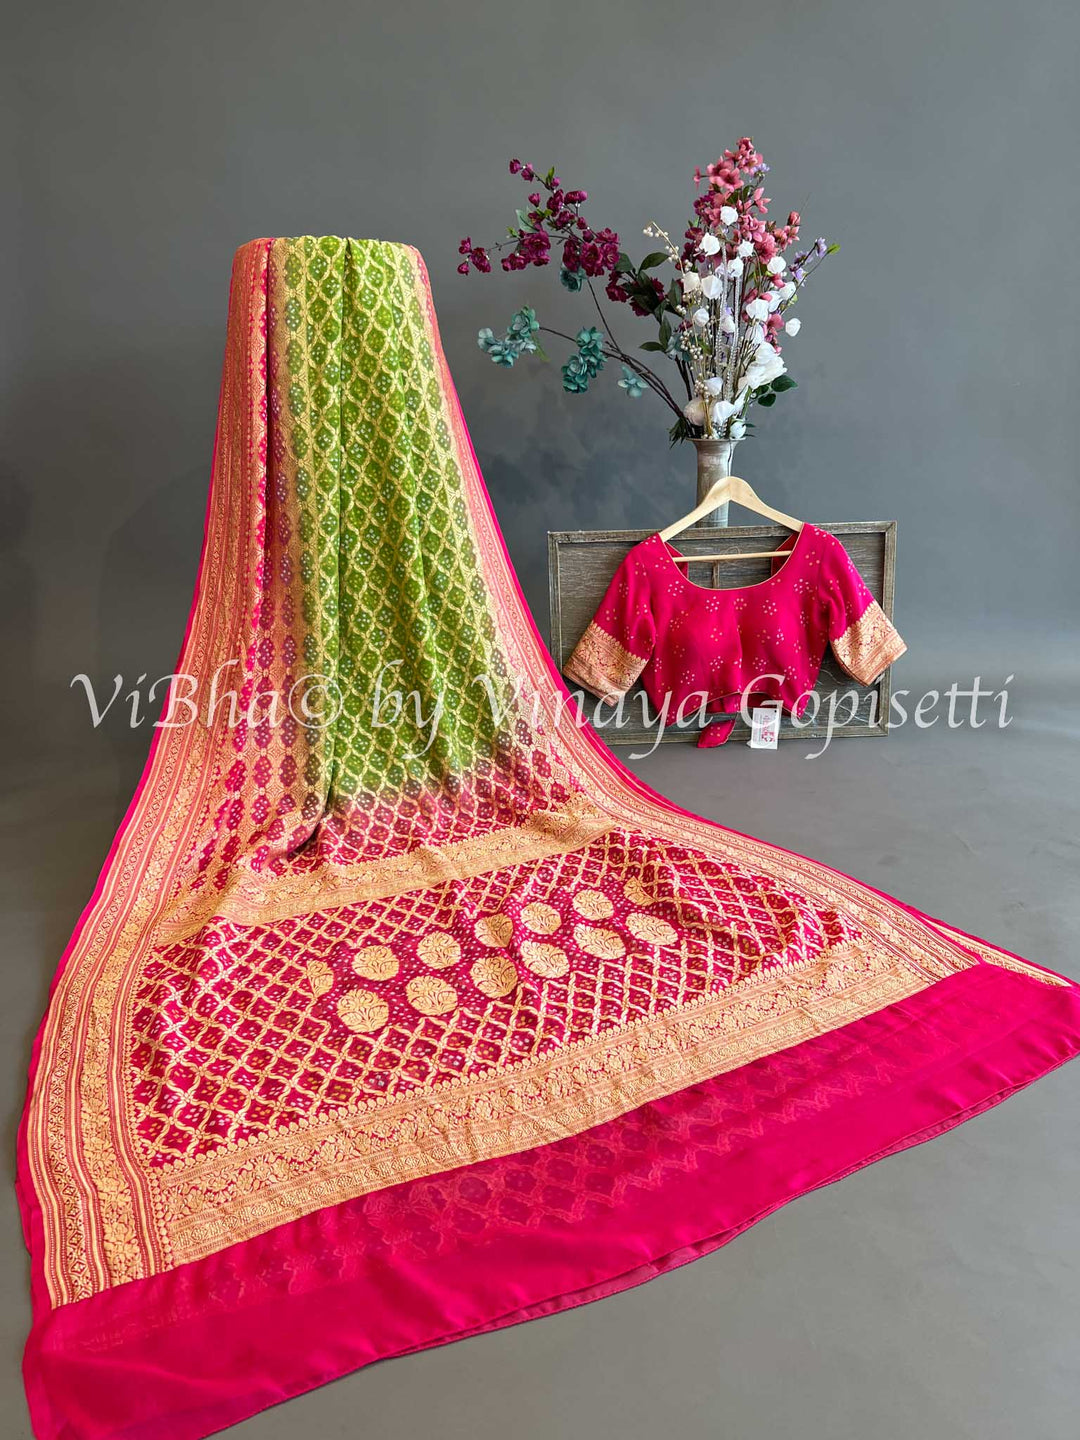 Green and Light Pink Bandhani Georgette Saree and Blouse.